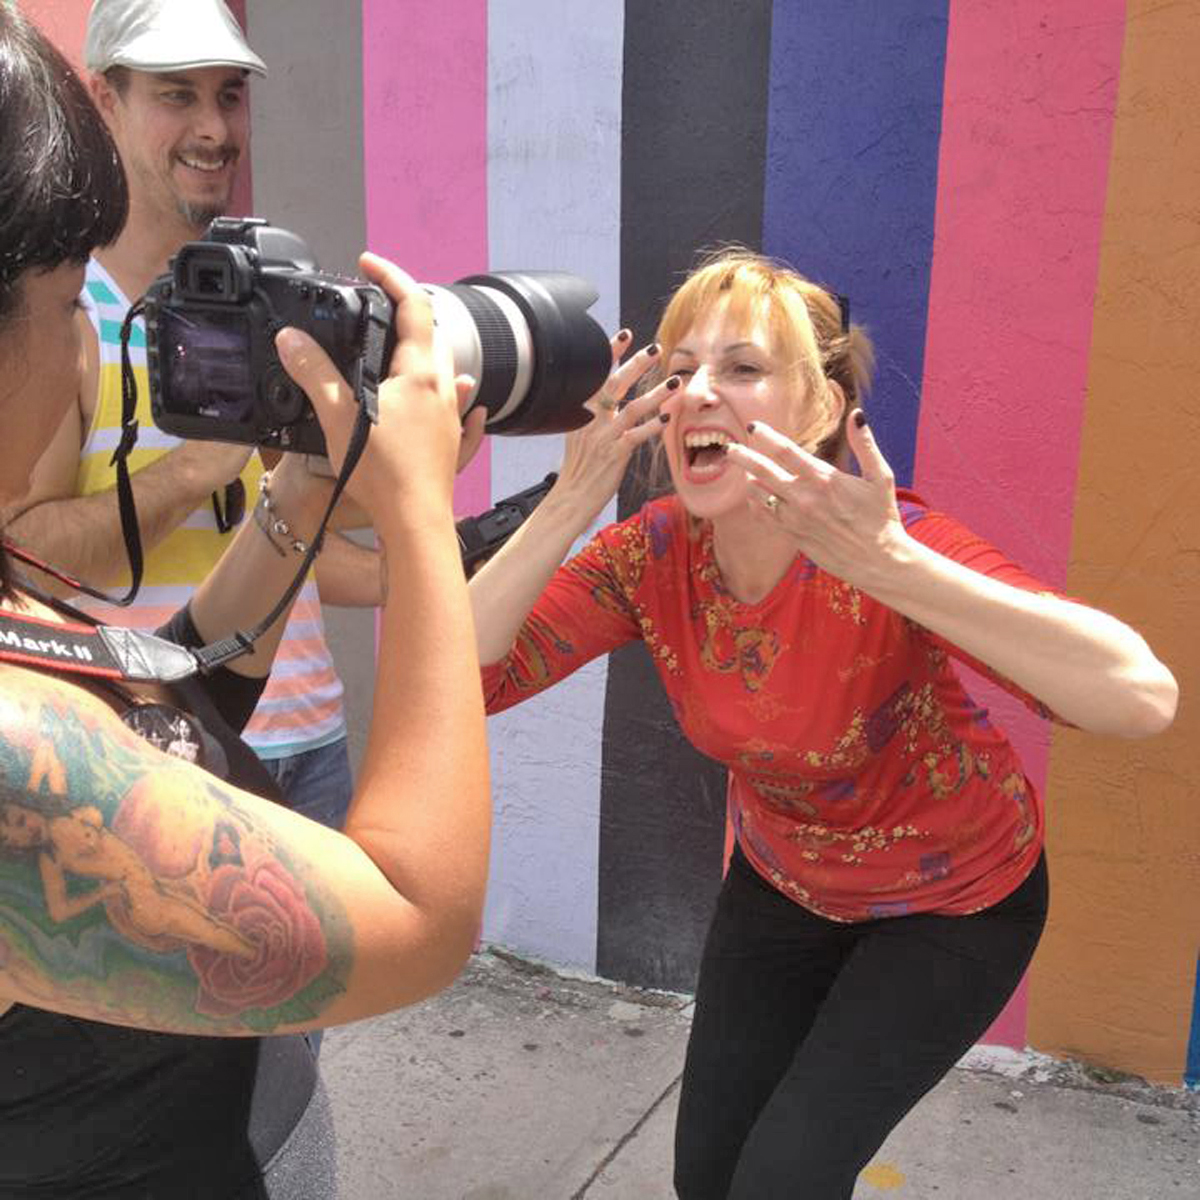 Reading Queer Promotional Video Behind the Scenes